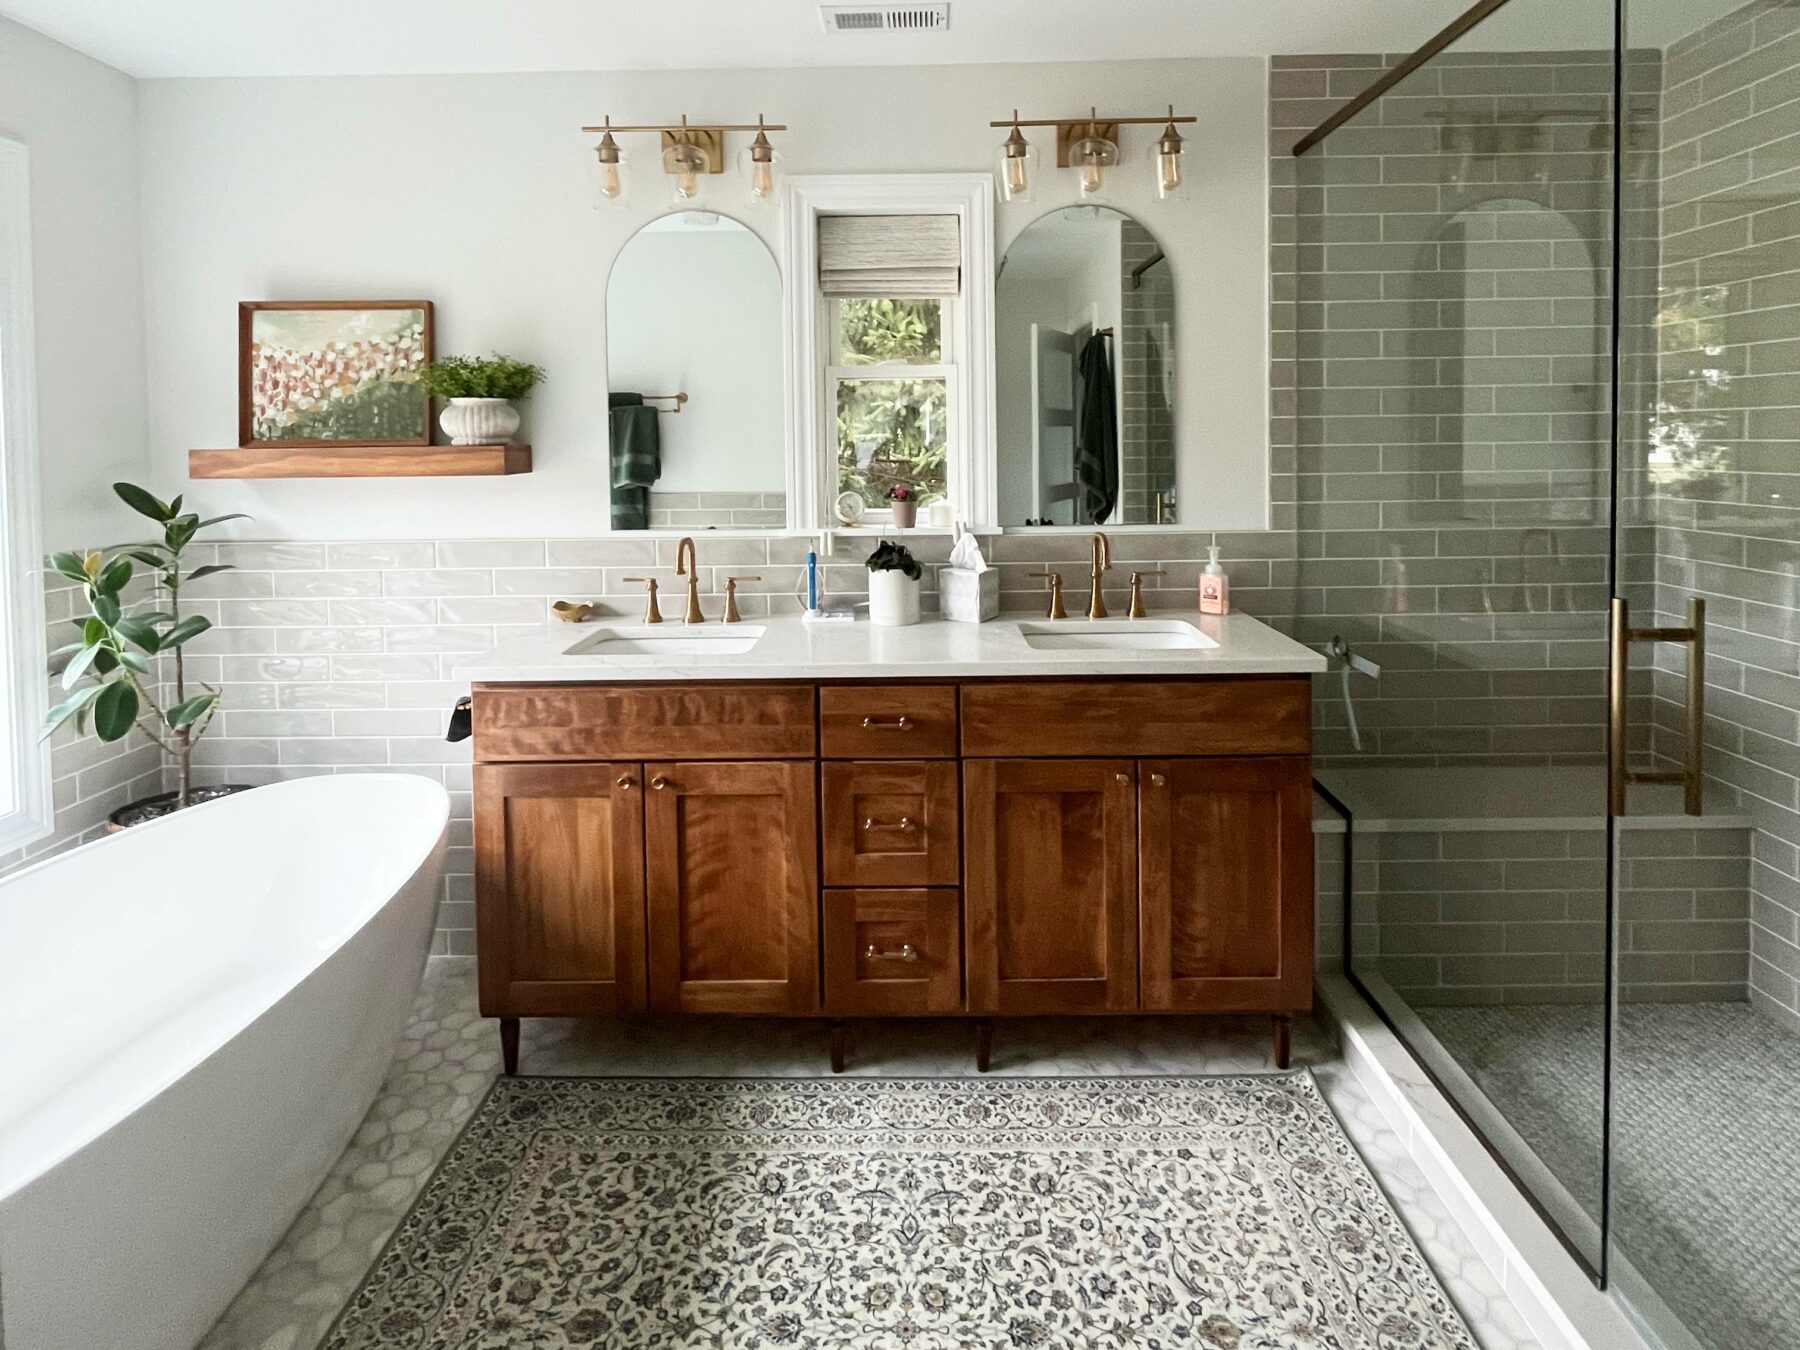 Transitional style gives warmth to this bathroom remodel